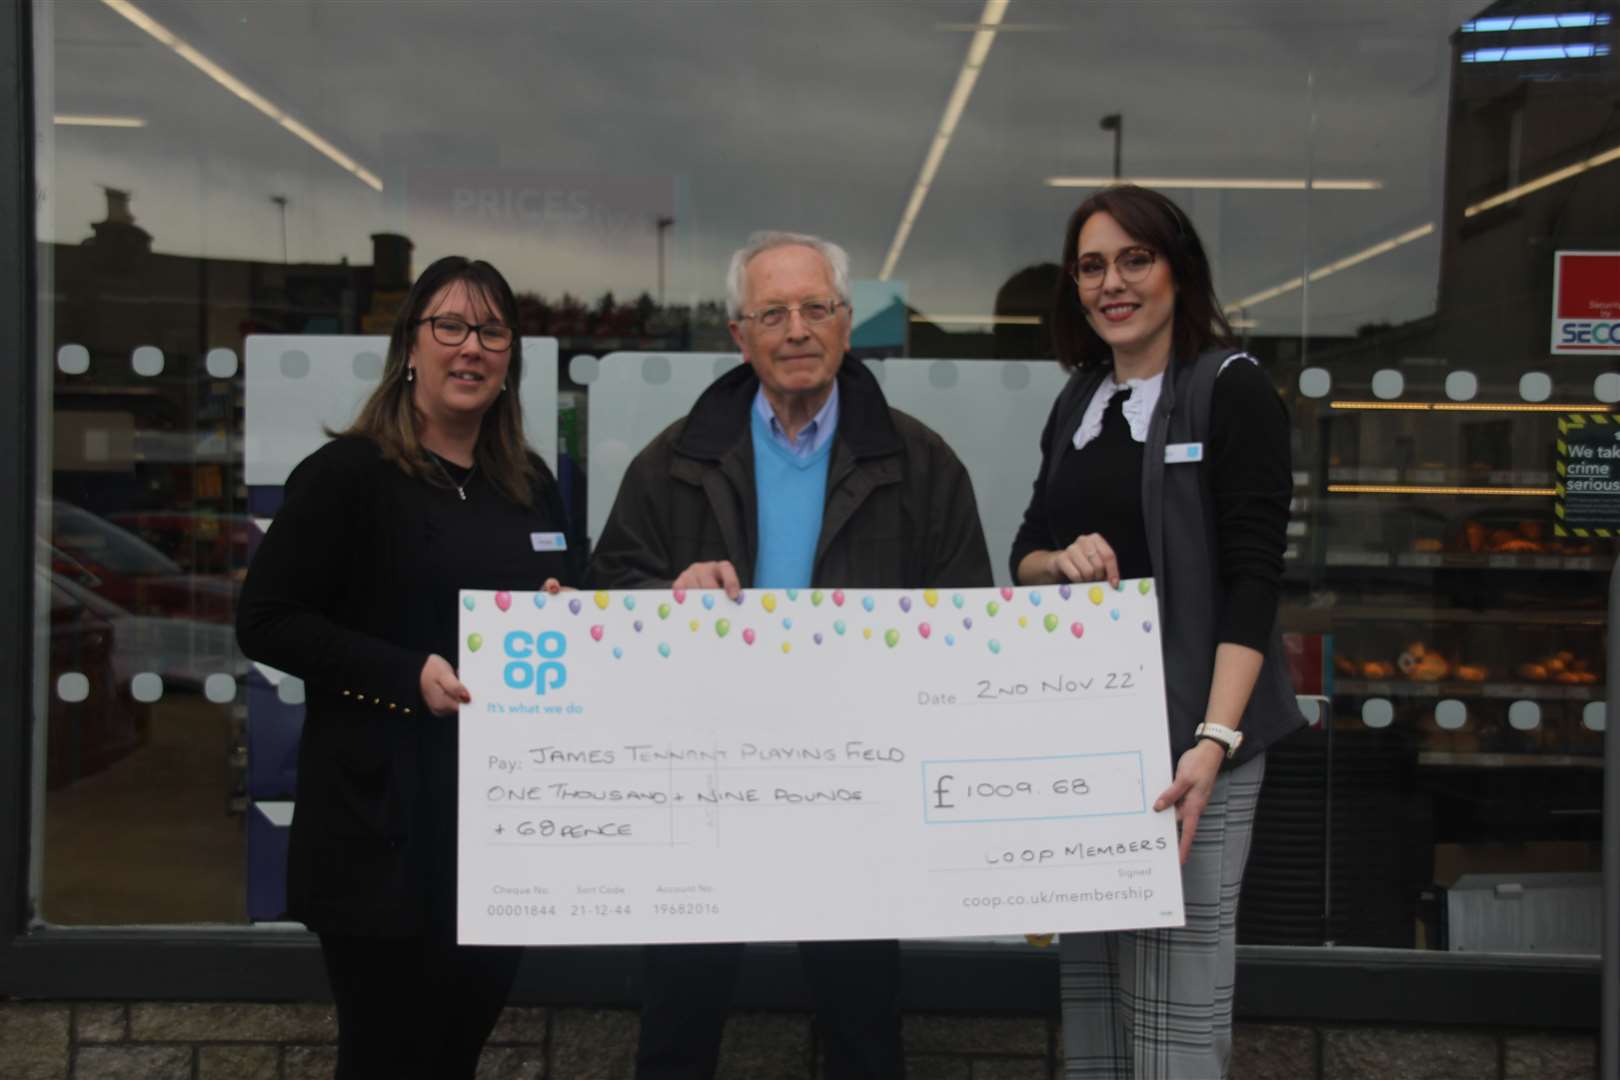 James Tennant Playing Field Association received over £1000 from Coop Local Community Fund. Picture: Kirsty Brown